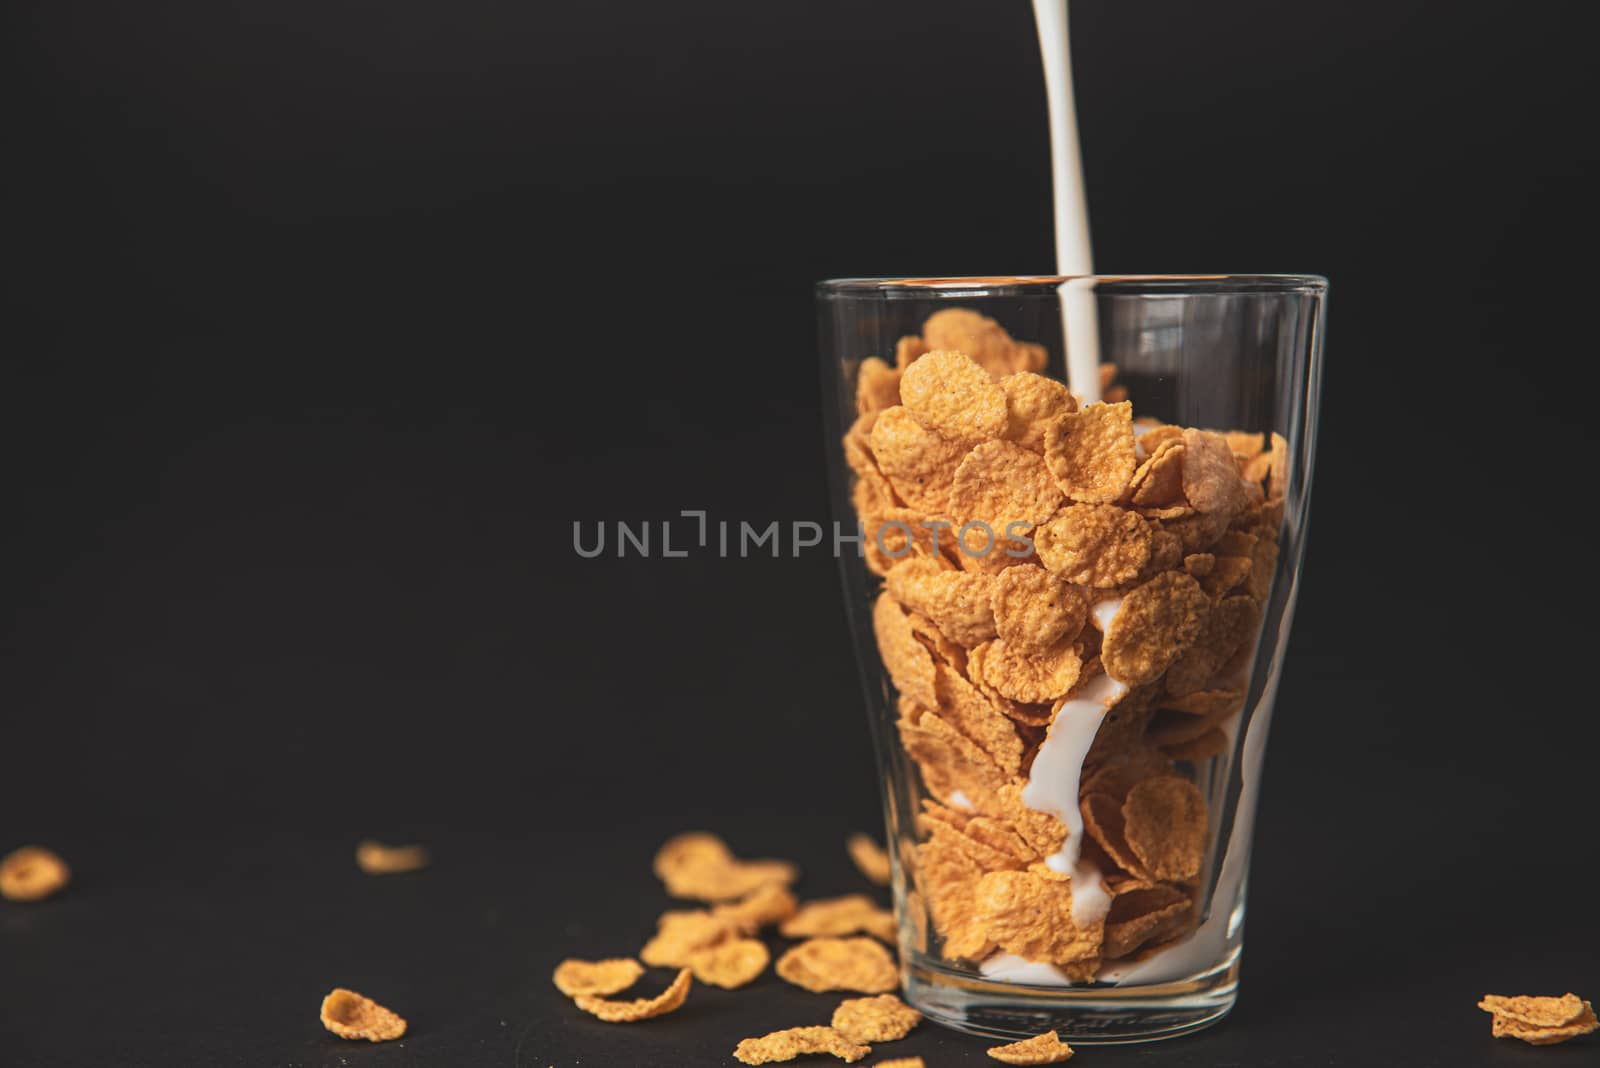 cornflakes with milk in a transparent glass against a black background by marynkin